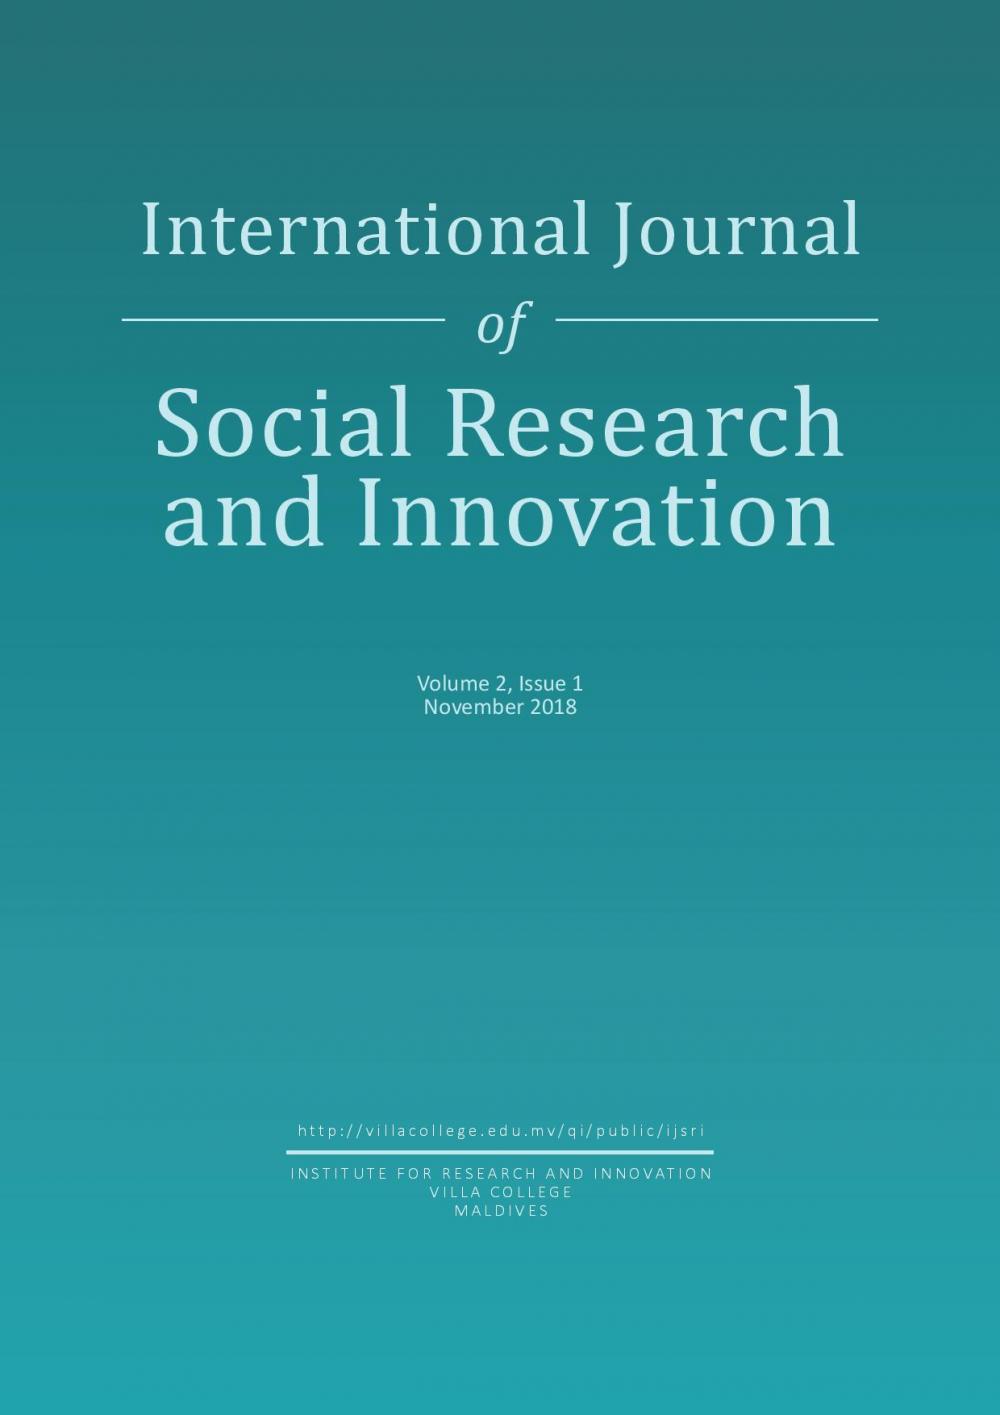 					View Vol. 2 No. 1 (2018): International Journal of Social Research and Innovation
				